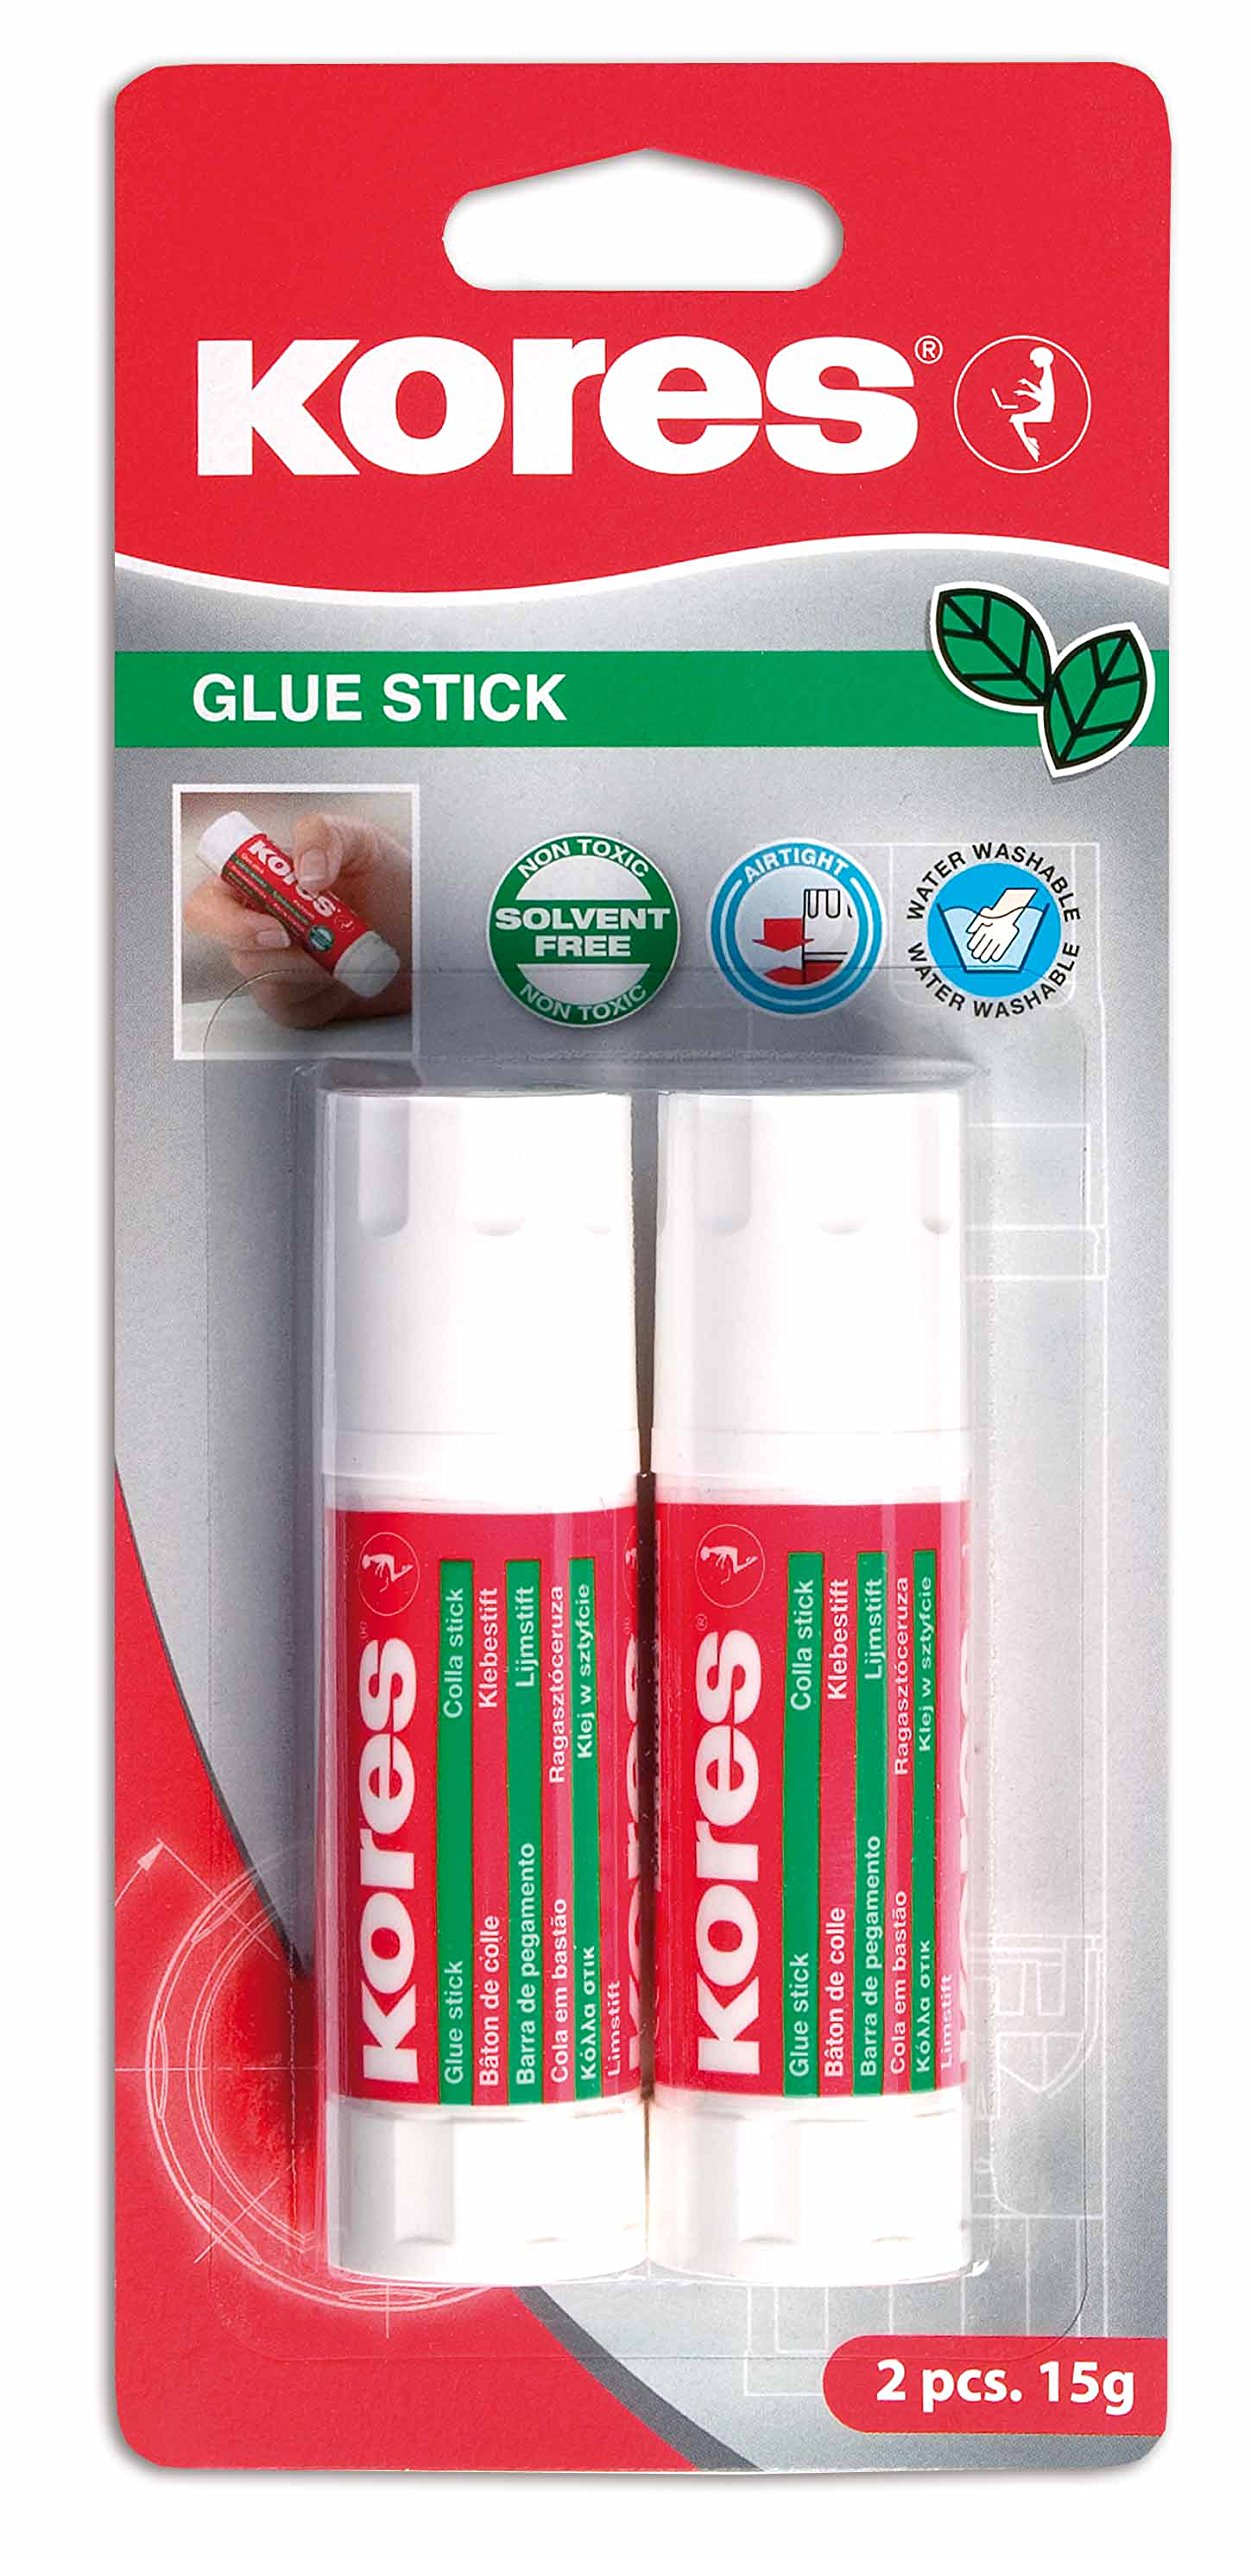 Kores - Glue Stick Strong-Hold Adhesive Safe and Non-Toxic Craft